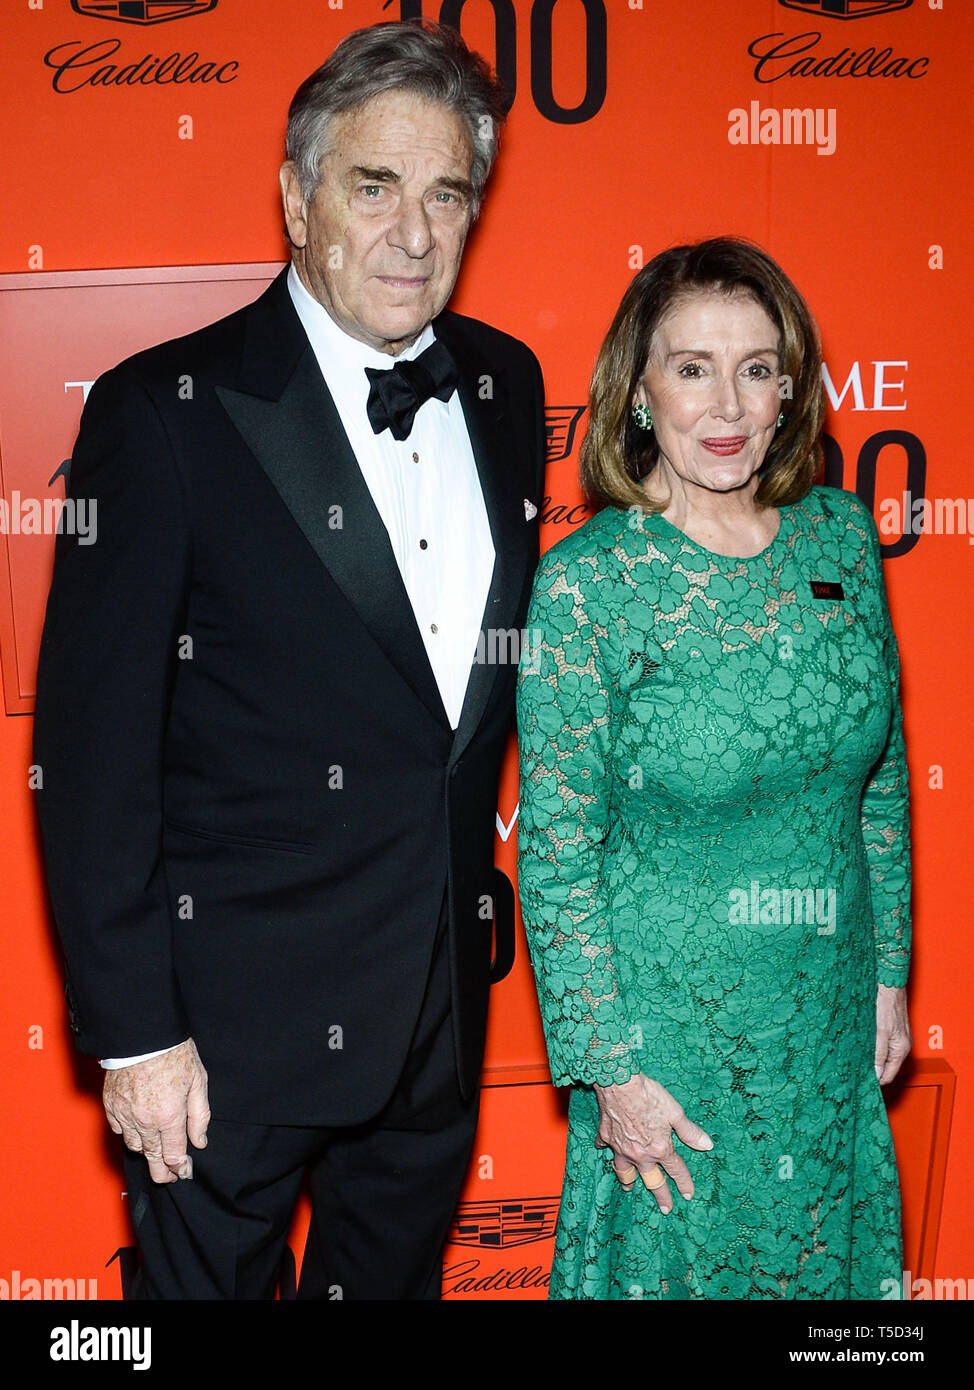 MANHATTAN, NEW YORK CITY, NEW YORK, USA - APRIL 23: Paul Pelosi, Nancy Pelosi arrive at the 2019 Time 100 Gala held at the Frederick P. Rose Hall at Jazz At Lincoln Center on April 23, 2019 in Manhattan, New York City, New York, United States. (Photo by Image Press Agency) Stock Photo